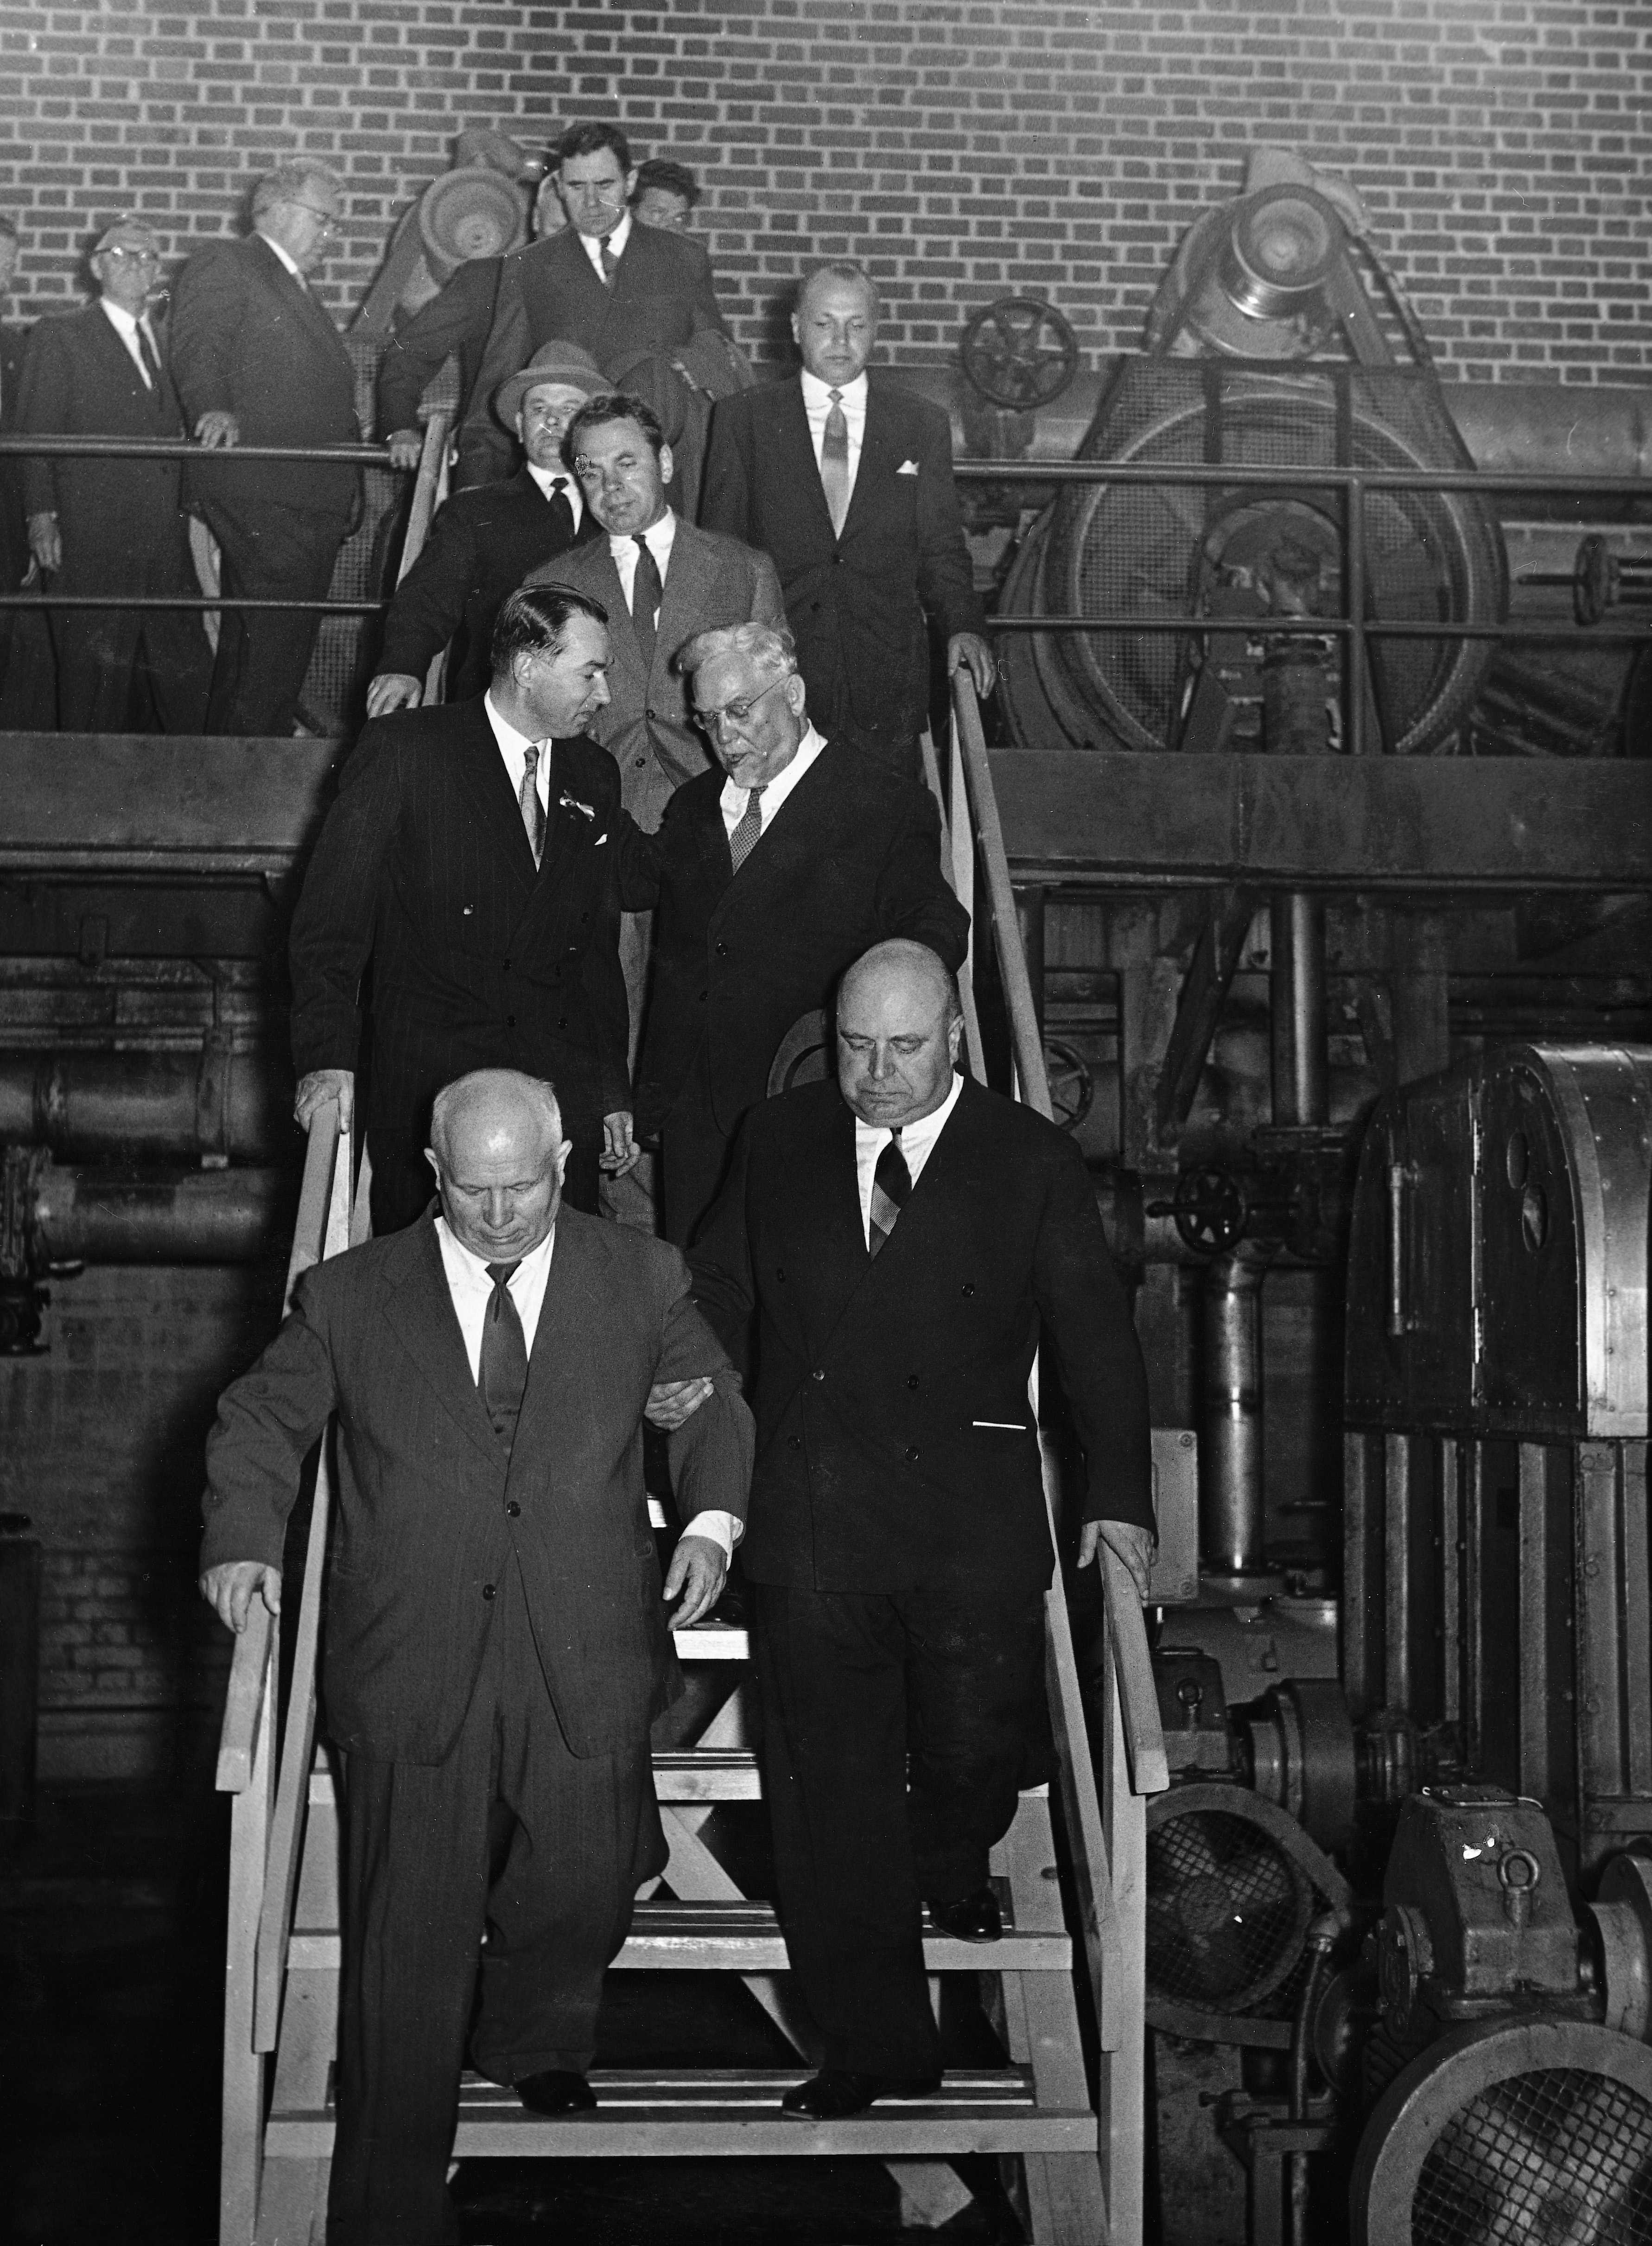 Juuso Walden and Khrushchev in Kaipola paper mill